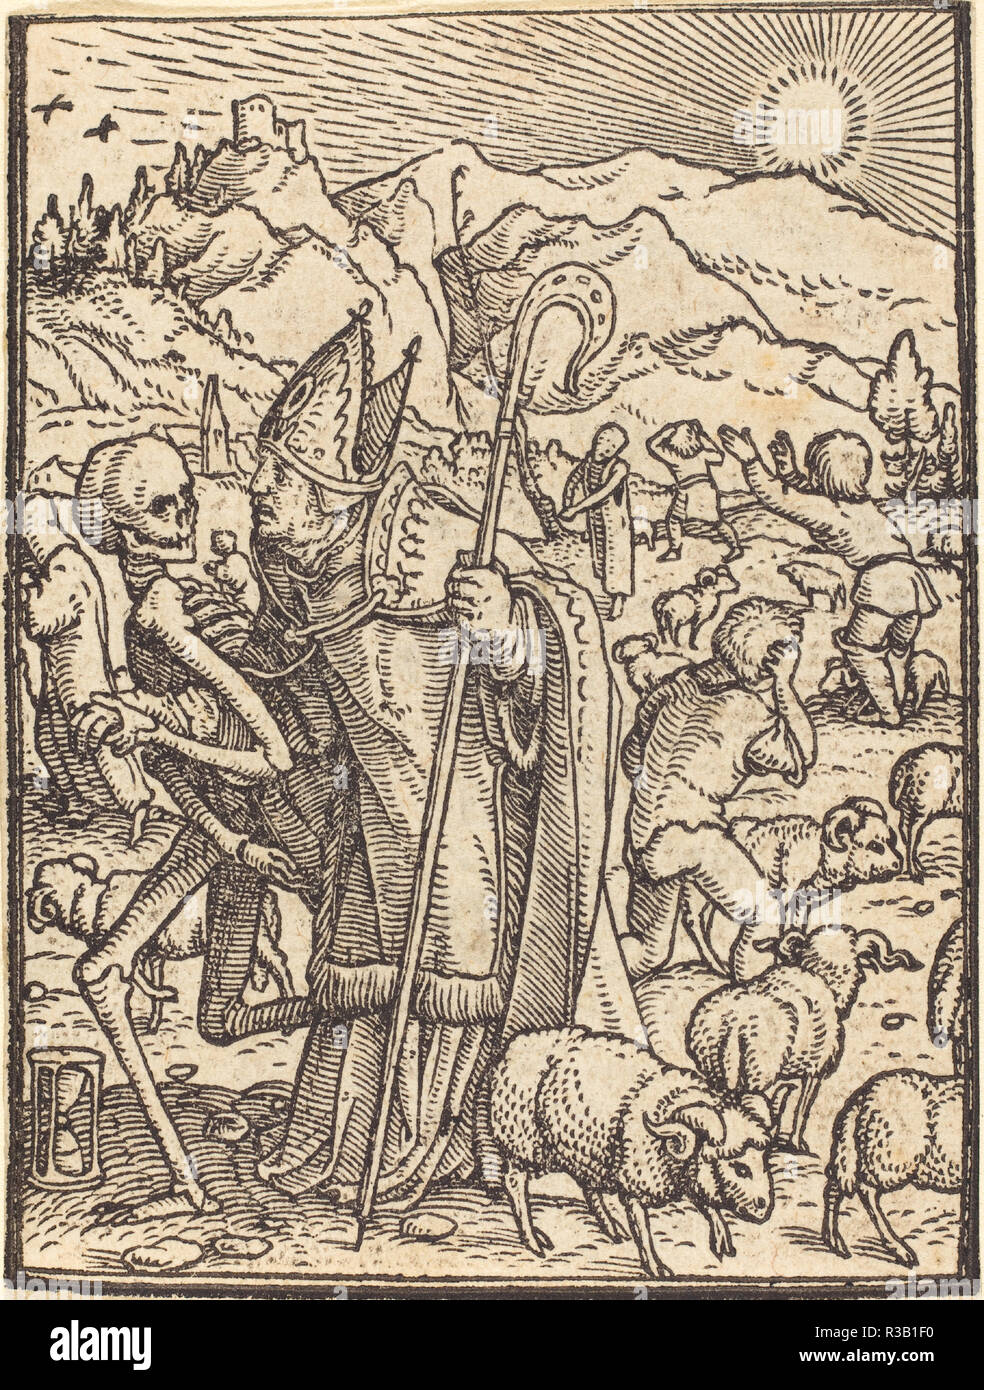 Bishop. Medium: woodcut. Museum: National Gallery of Art, Washington DC. Author: Hans Holbein the Younger. Stock Photo